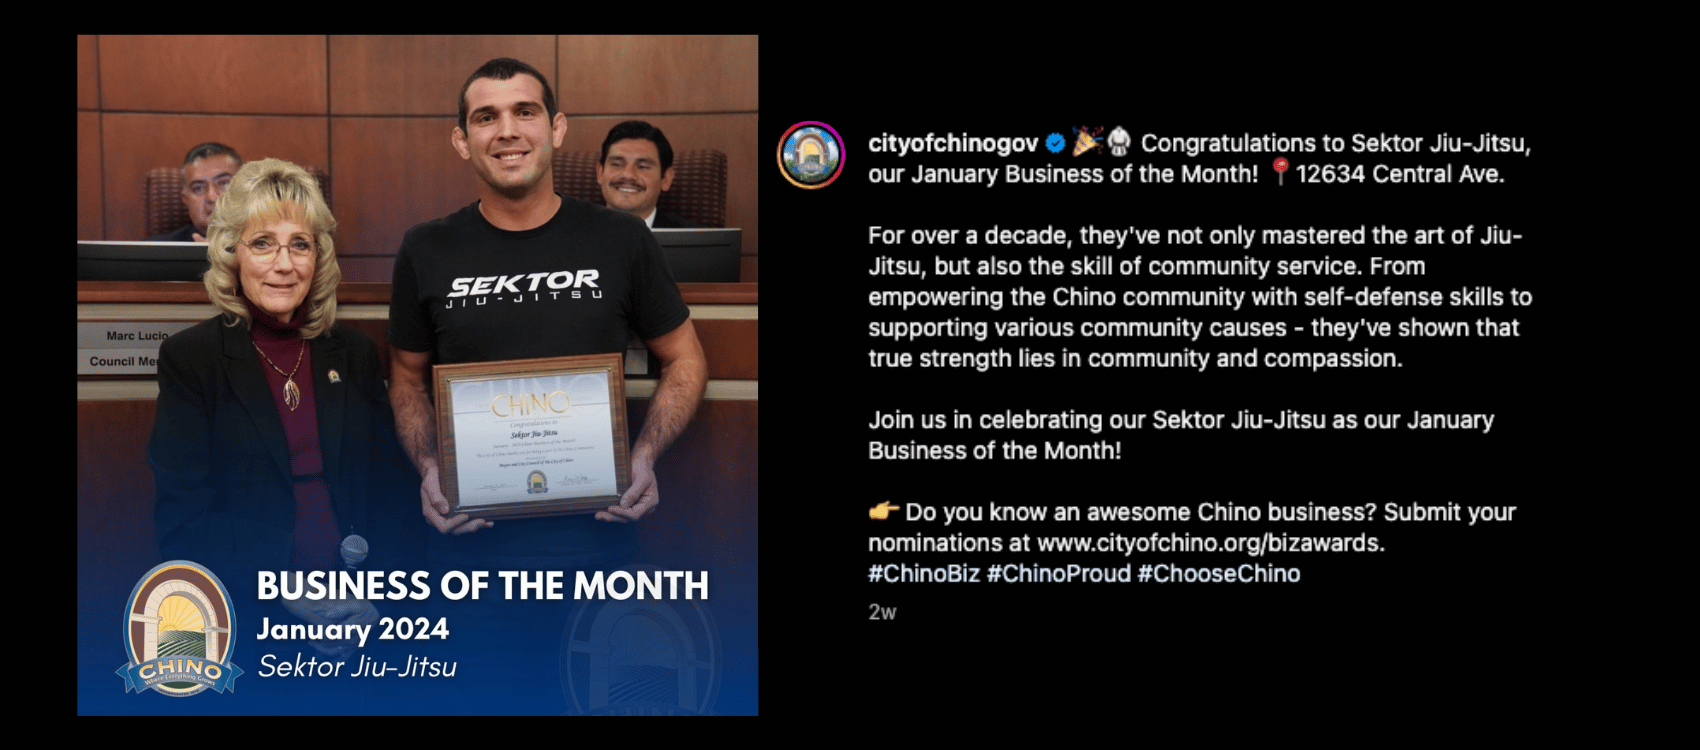 Instagram post from the City of Chino recognizing Sektor BJJ